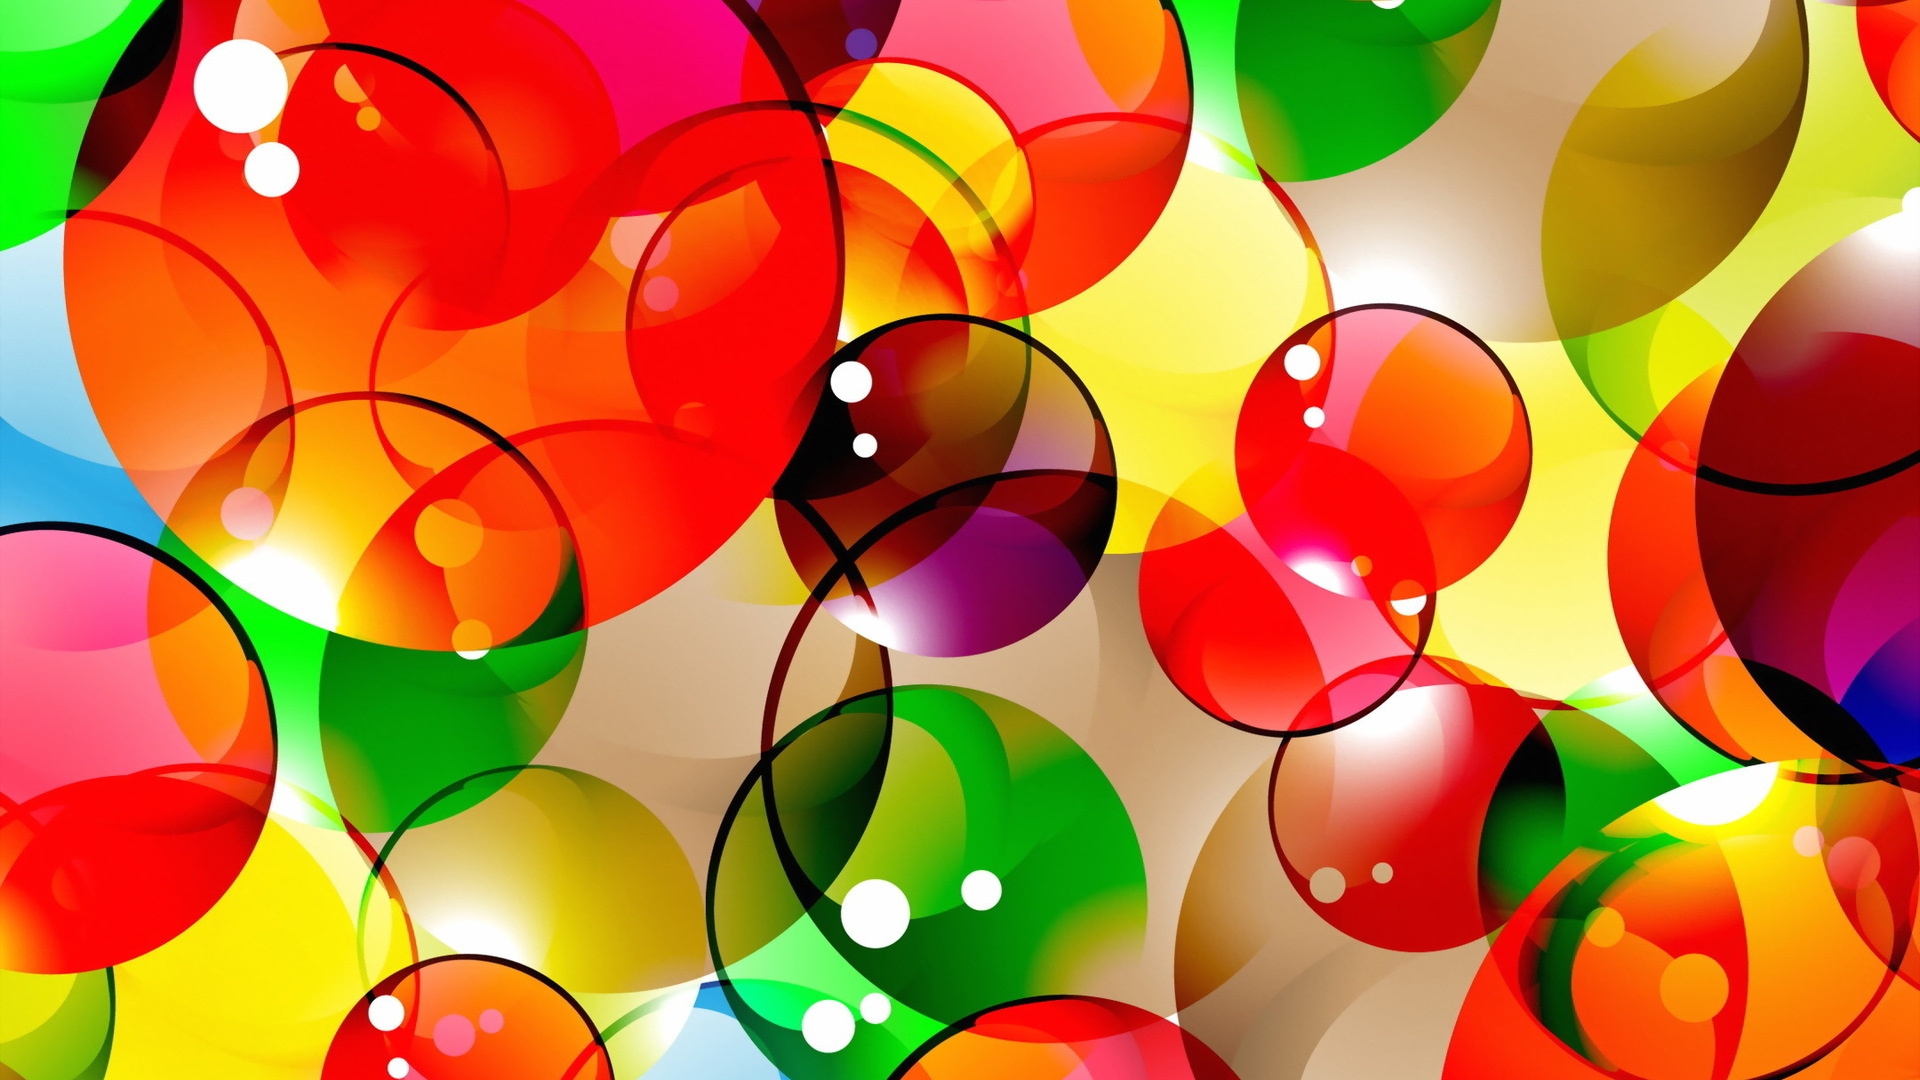 Abstract Colorful Bubbles for 1920 x 1080 HDTV 1080p resolution